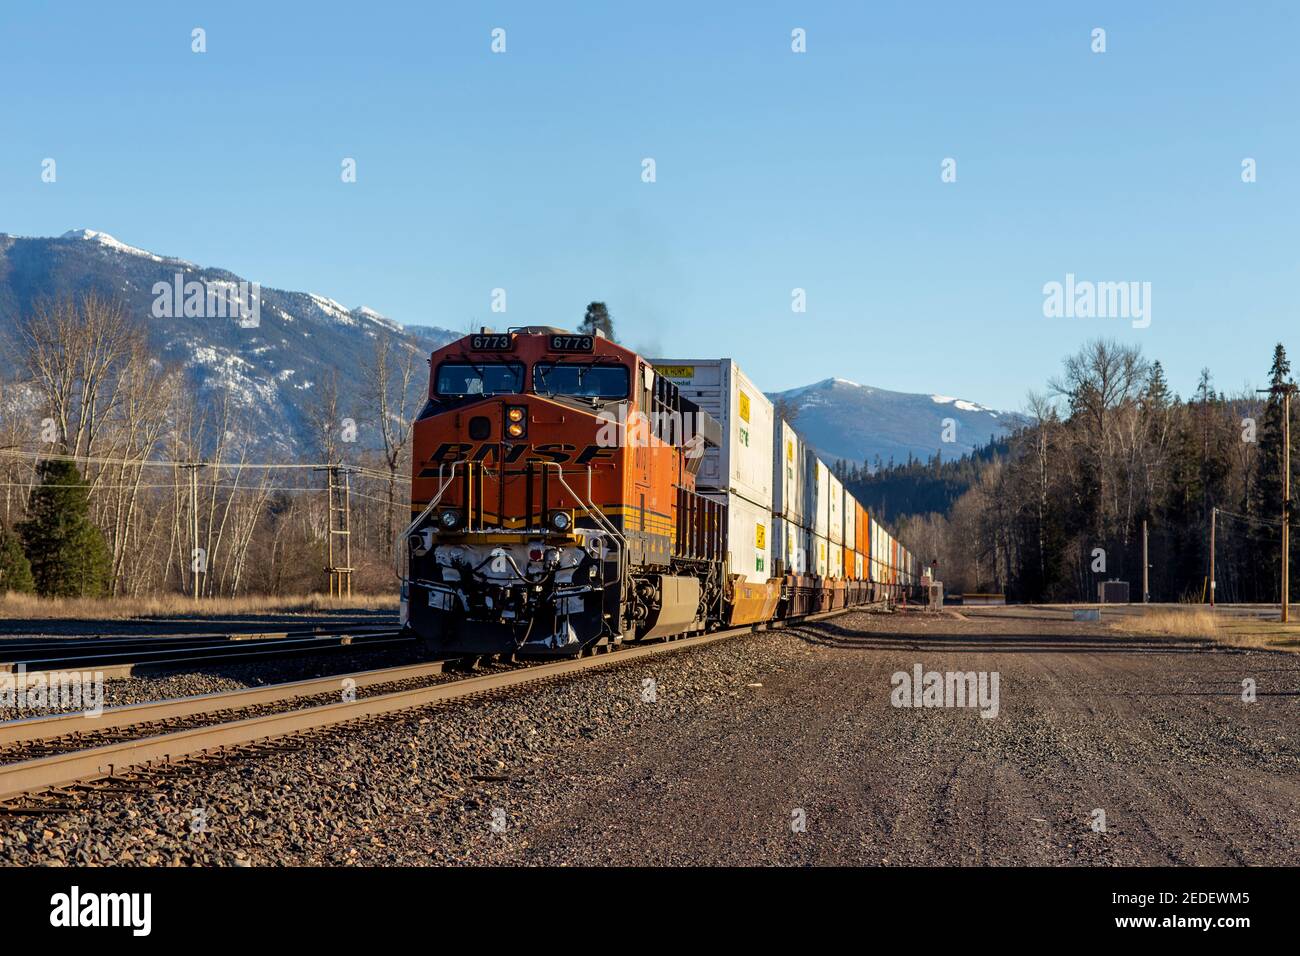 A trailing push locomotive, 6773, of a BNSF intermodal shipping container freight train coming down the tracks in the town of Troy, Montana. Stock Photo